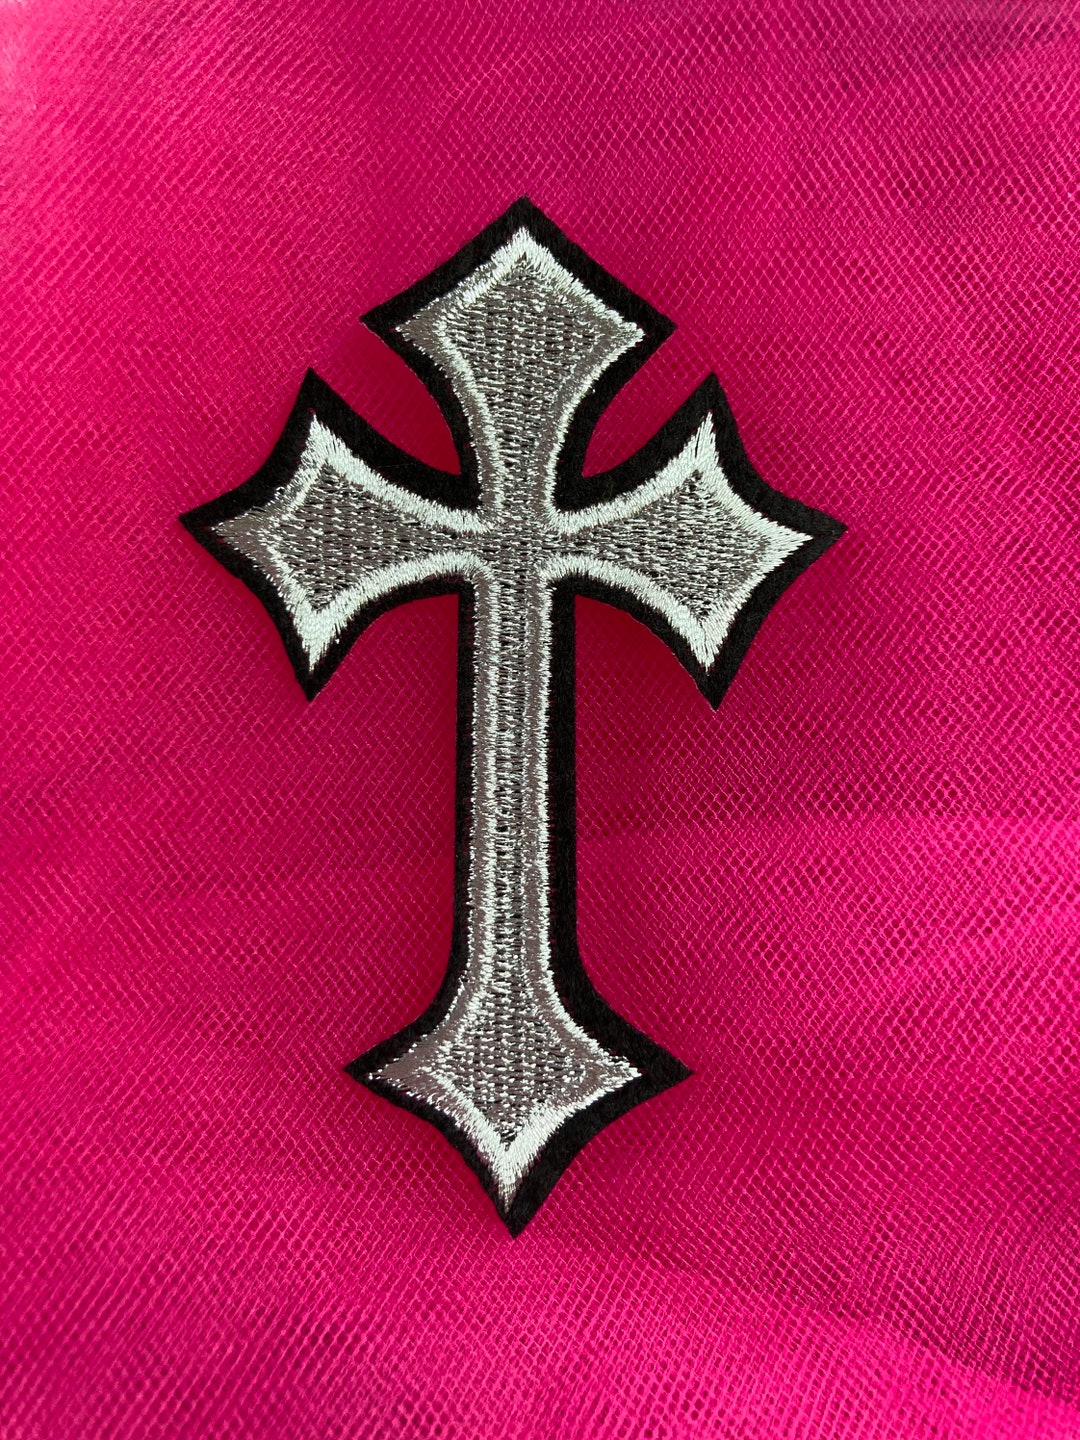 Gold or Silver Embroidered Iron on Applique Patch,embroidery Cross Patch  for T-shirt or Coat,decoration Embroidery Appliques Patches 